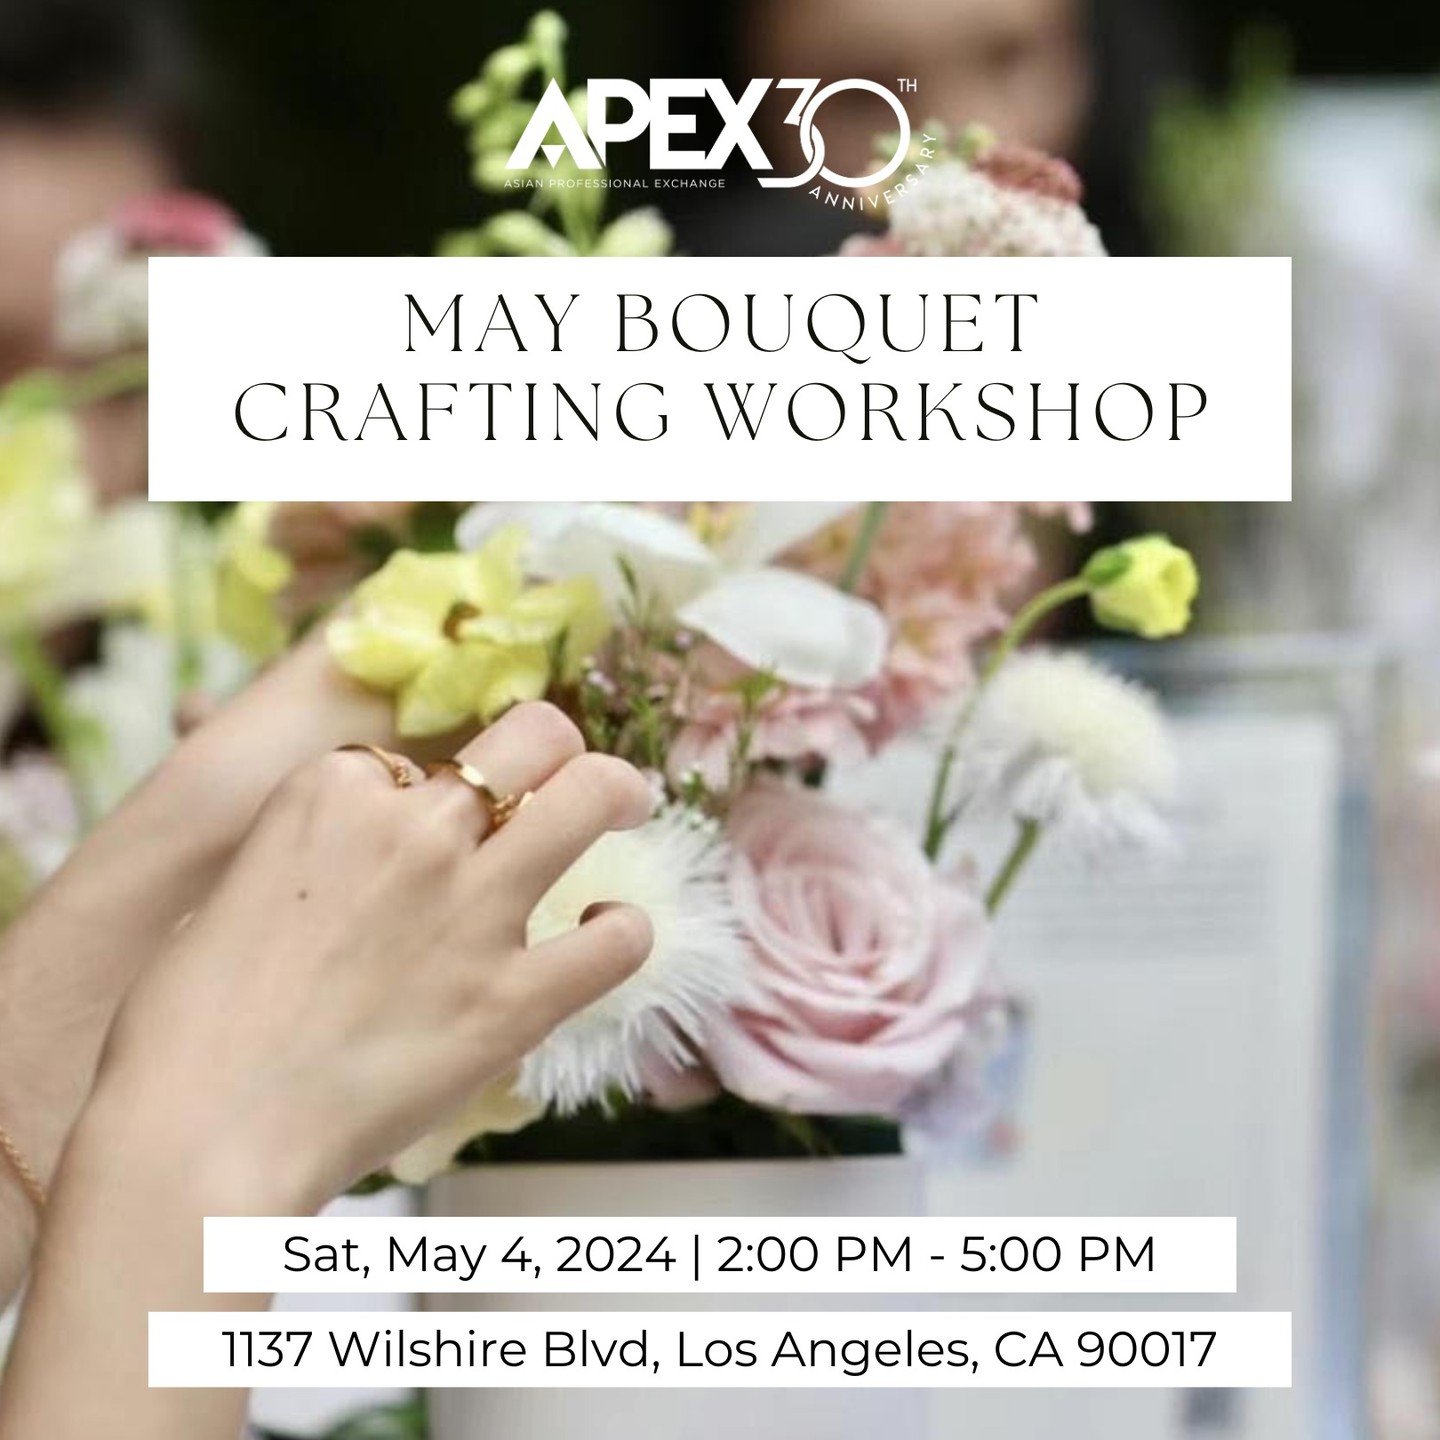 Join us for our 🌷 May Bouquet Crafting Workshop and unleash your creativity! Christine, a certified Ikebana florist, will lead you on a floral journey.

Christine is one of the youngest Ikebana florists in Los Angeles, certified by the Japanese flor